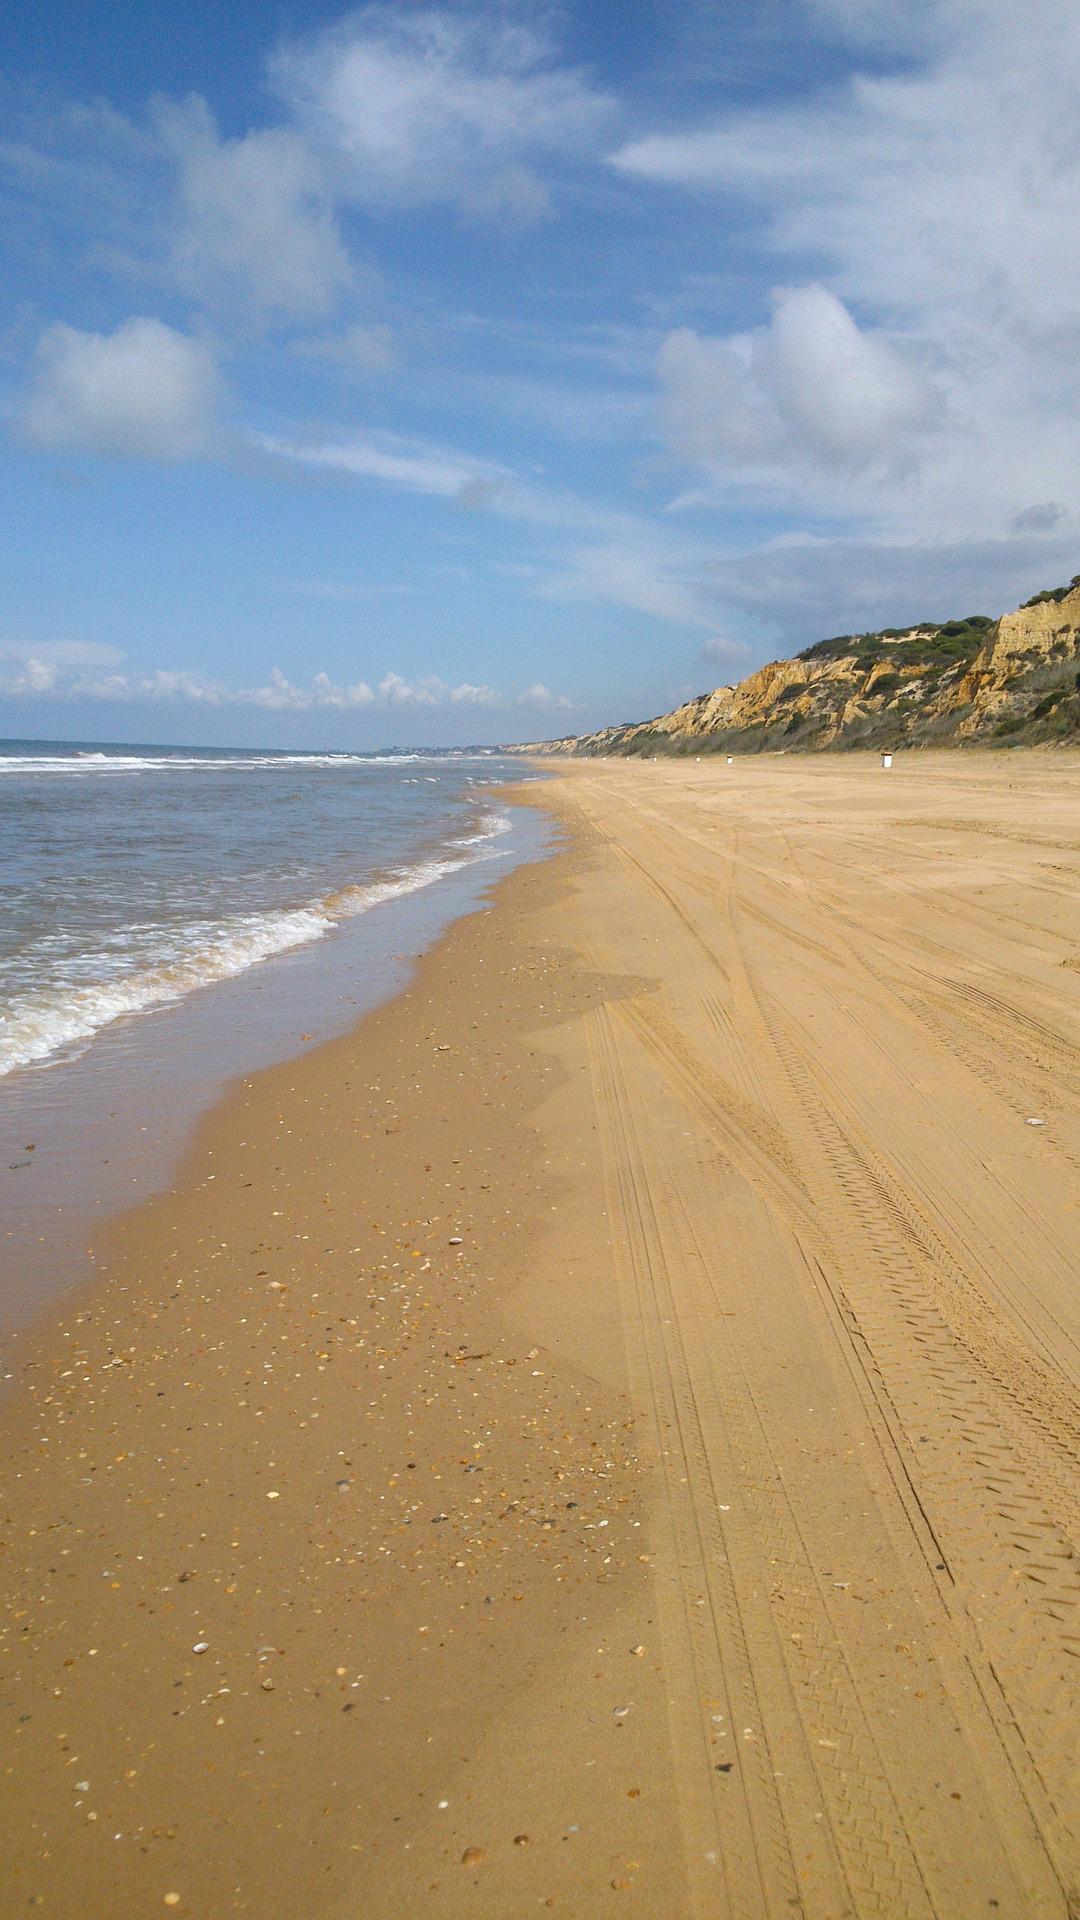 Andalucia is home to the longest beach in Spain